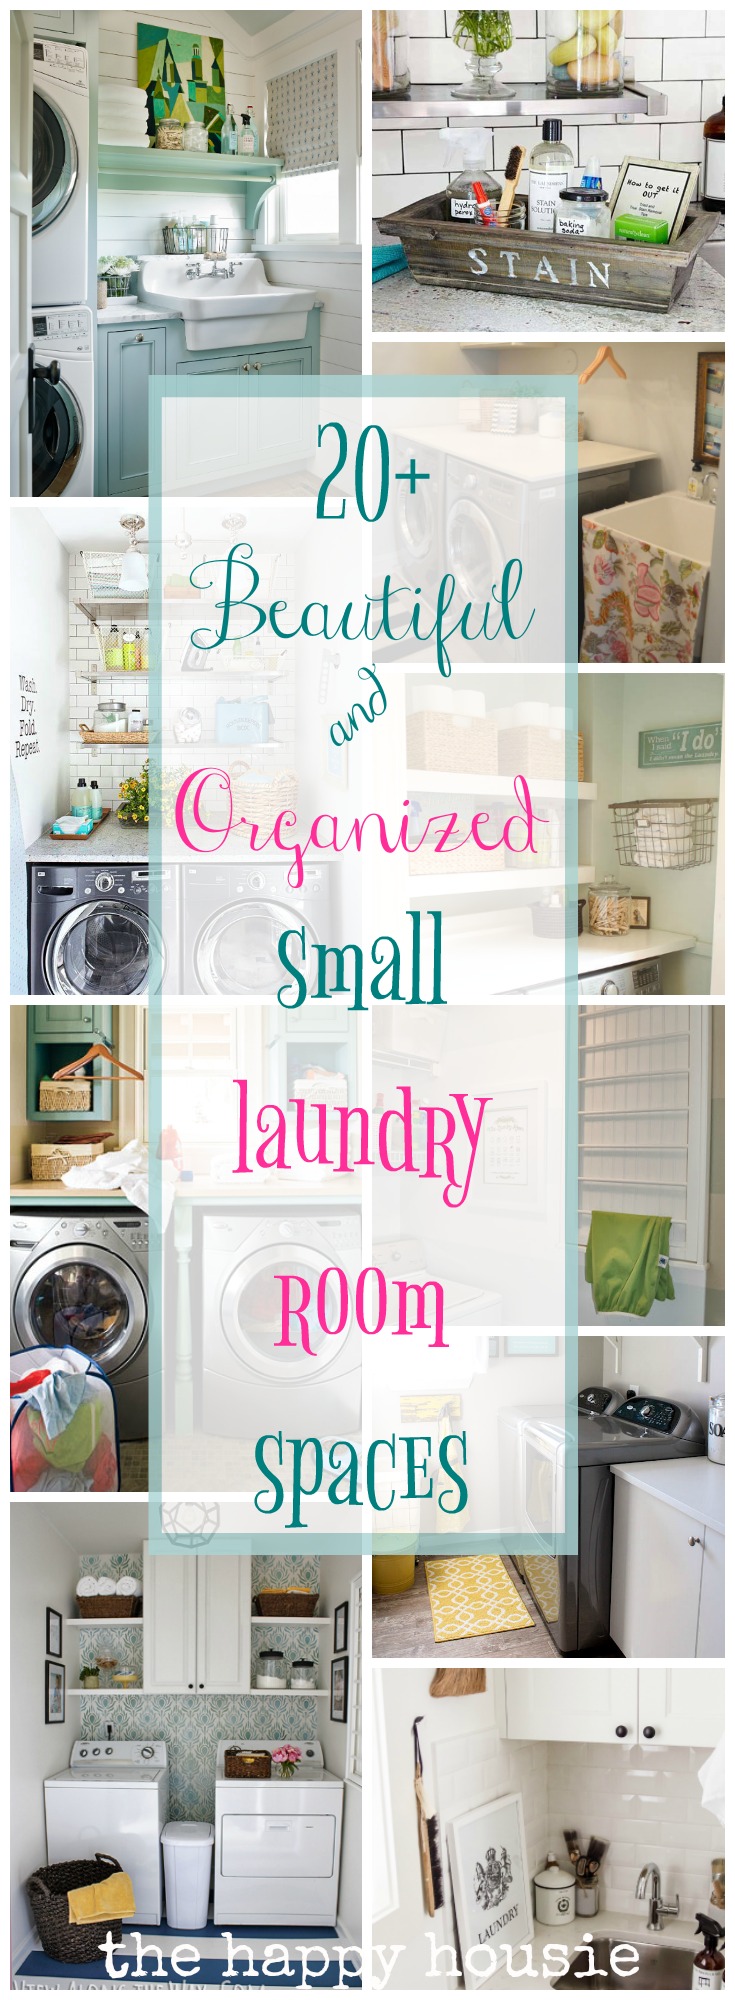 20+ Beautiful and organized small laundry room spaces poster.